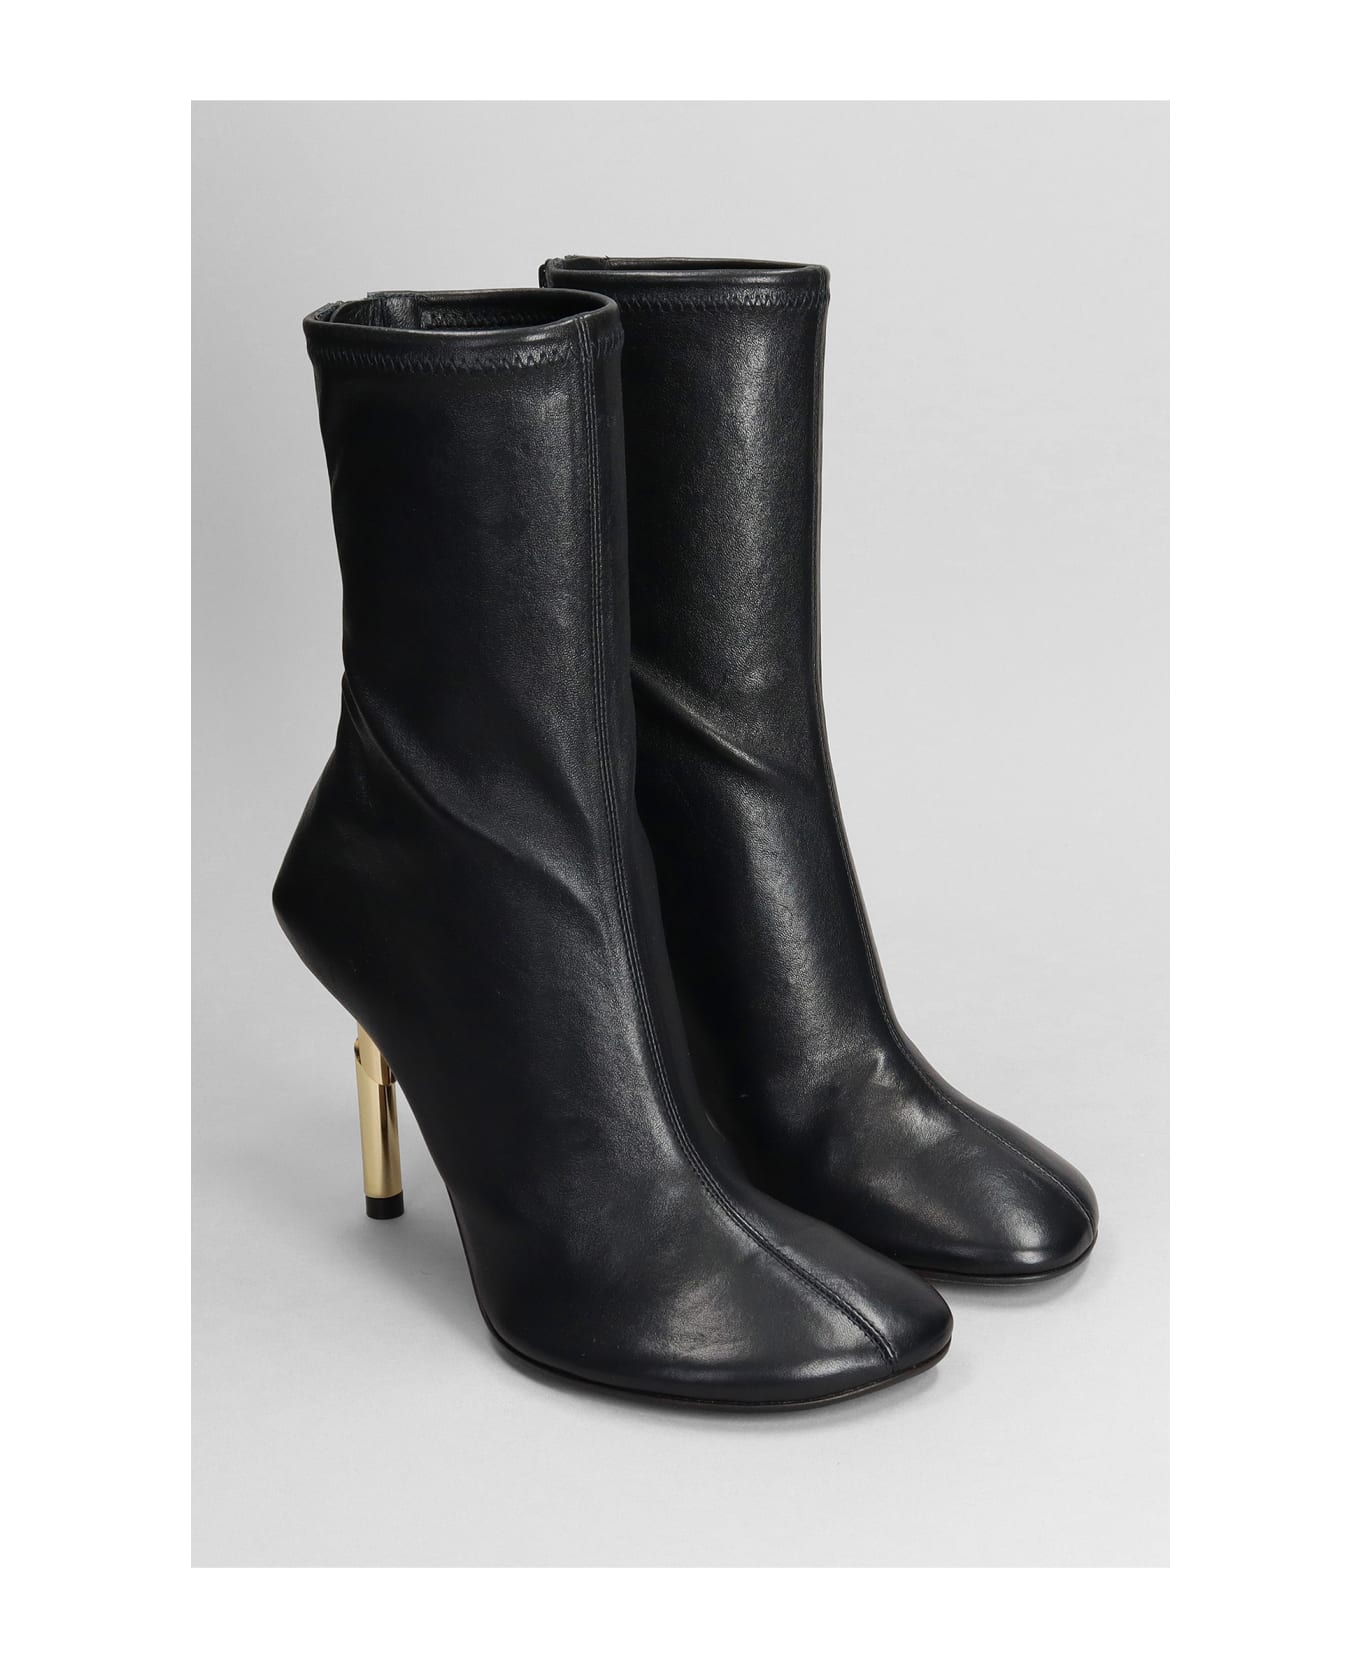 Lanvin Sequence Ankle Boots - Black